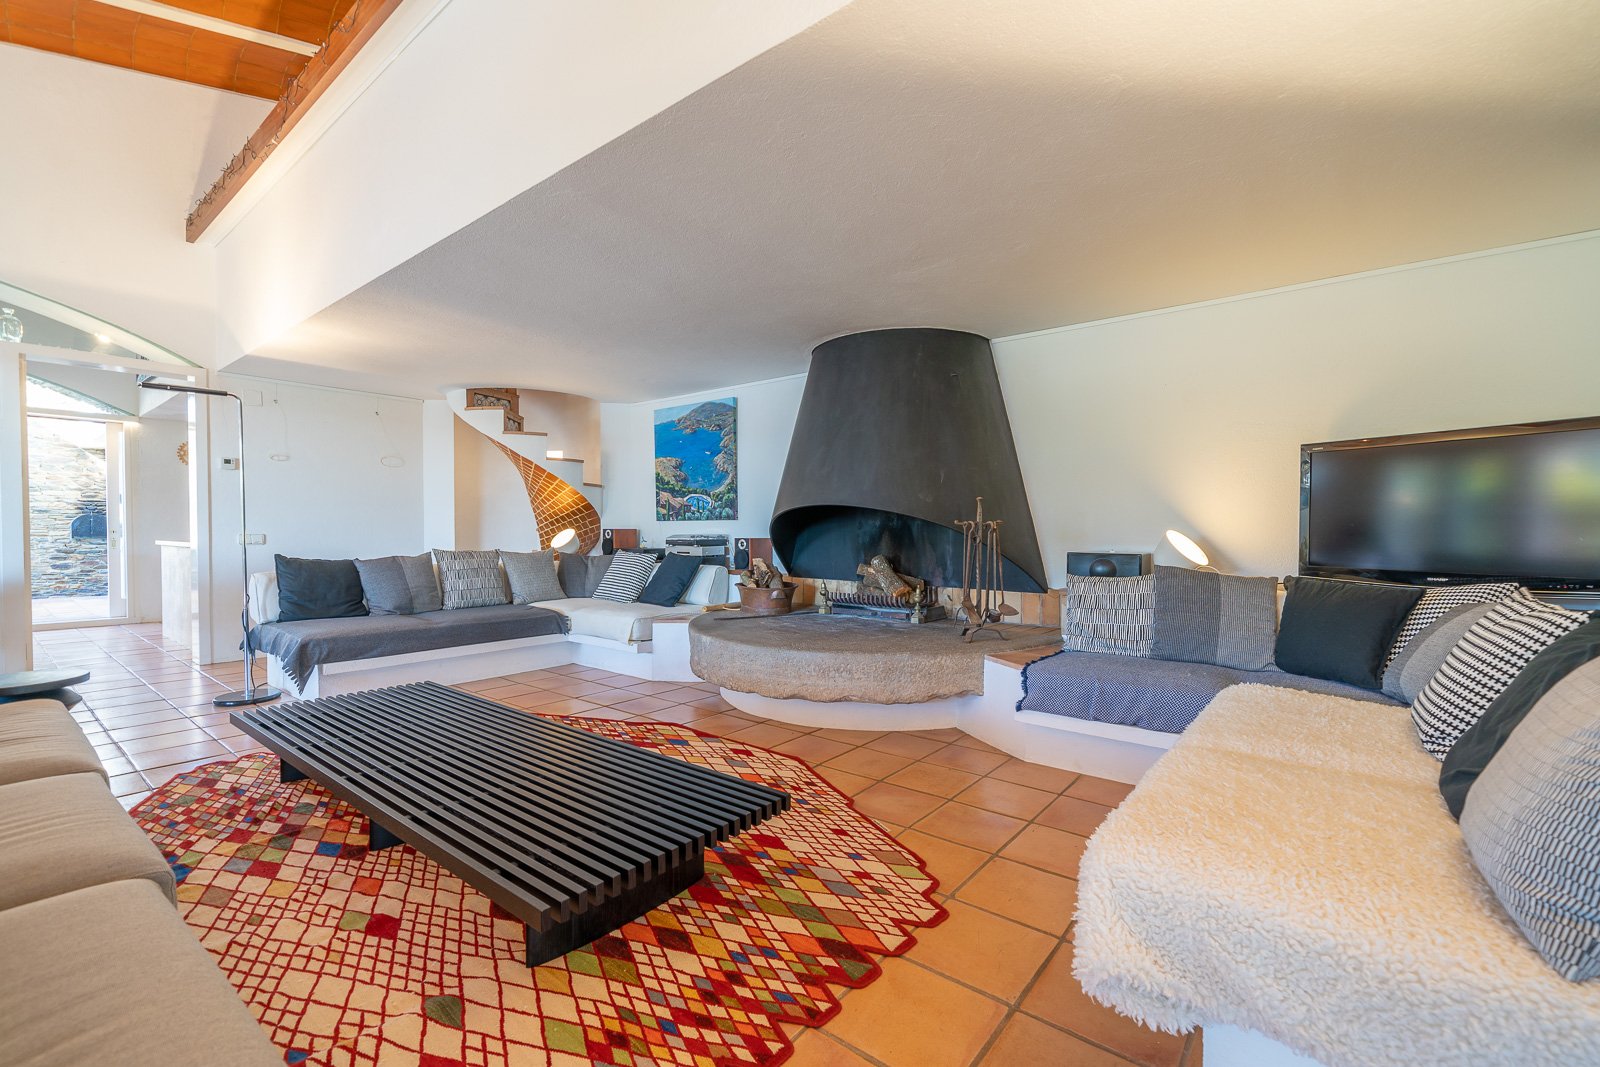 Prestigious house in Cadaqués, Spain, with exceptional living room